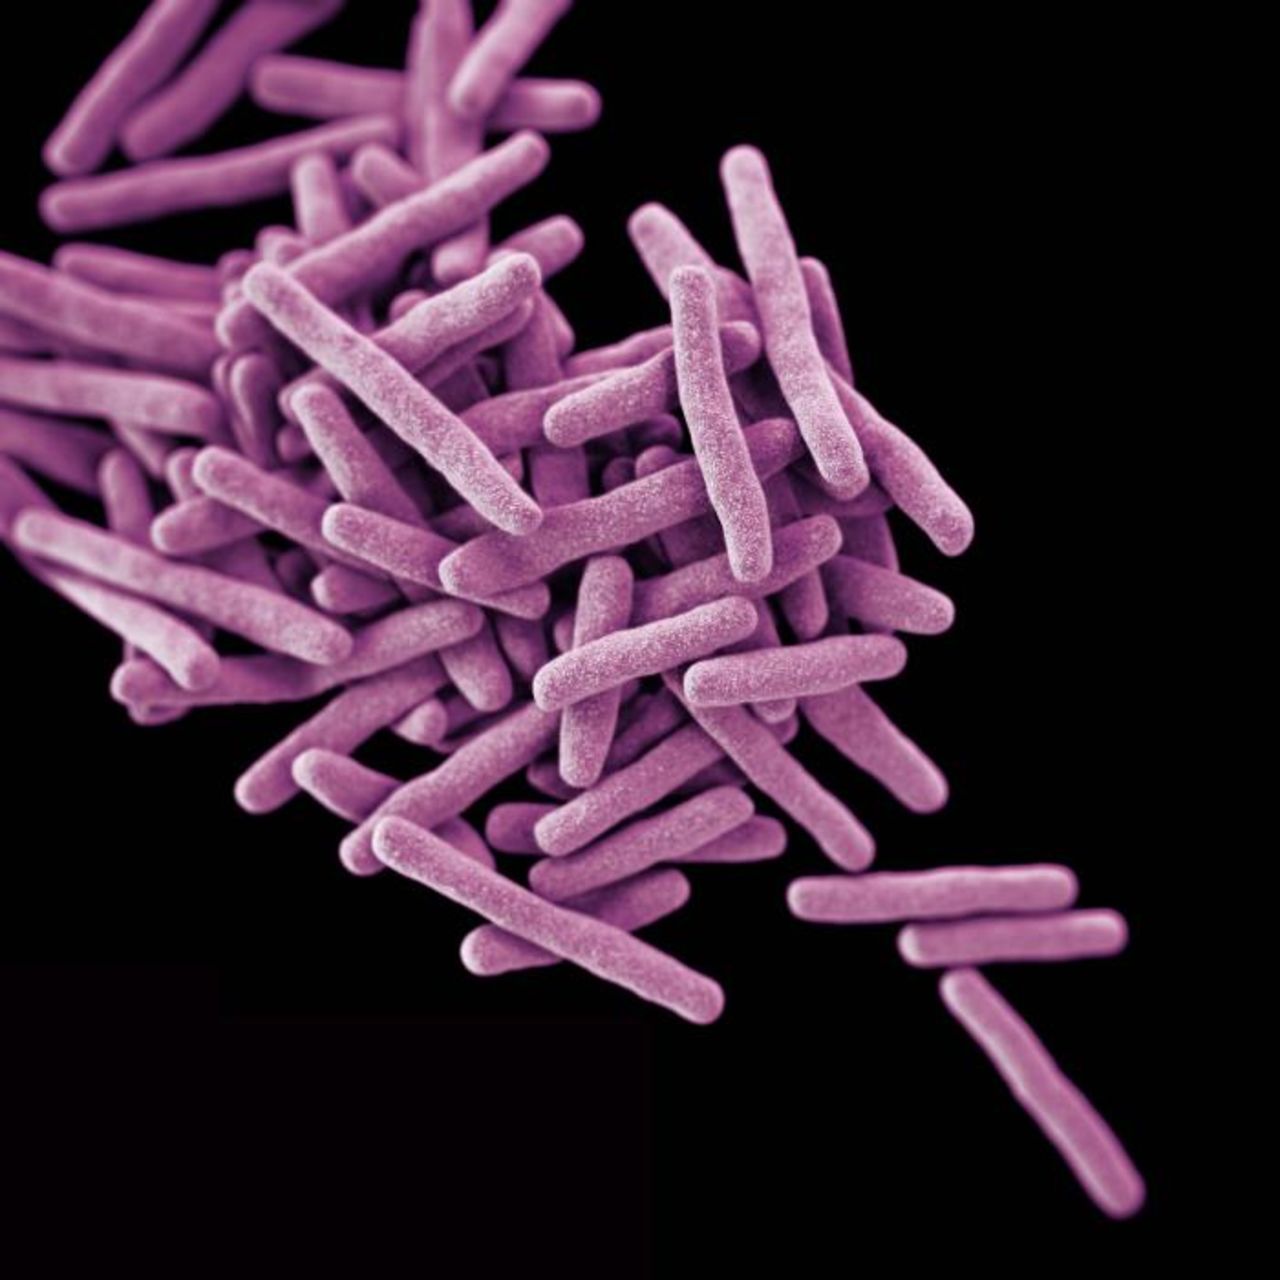 This rendering shows drug-resistant <em>Mycobacterium tuberculosis</em> bacteria, which cause TB. When people with lung TB cough, sneeze or spit, they propel TB bacteria into the air. <br />A third of the world's population has latent TB, which means they have been infected by TB bacteria but are not (yet) ill and cannot transmit the disease.